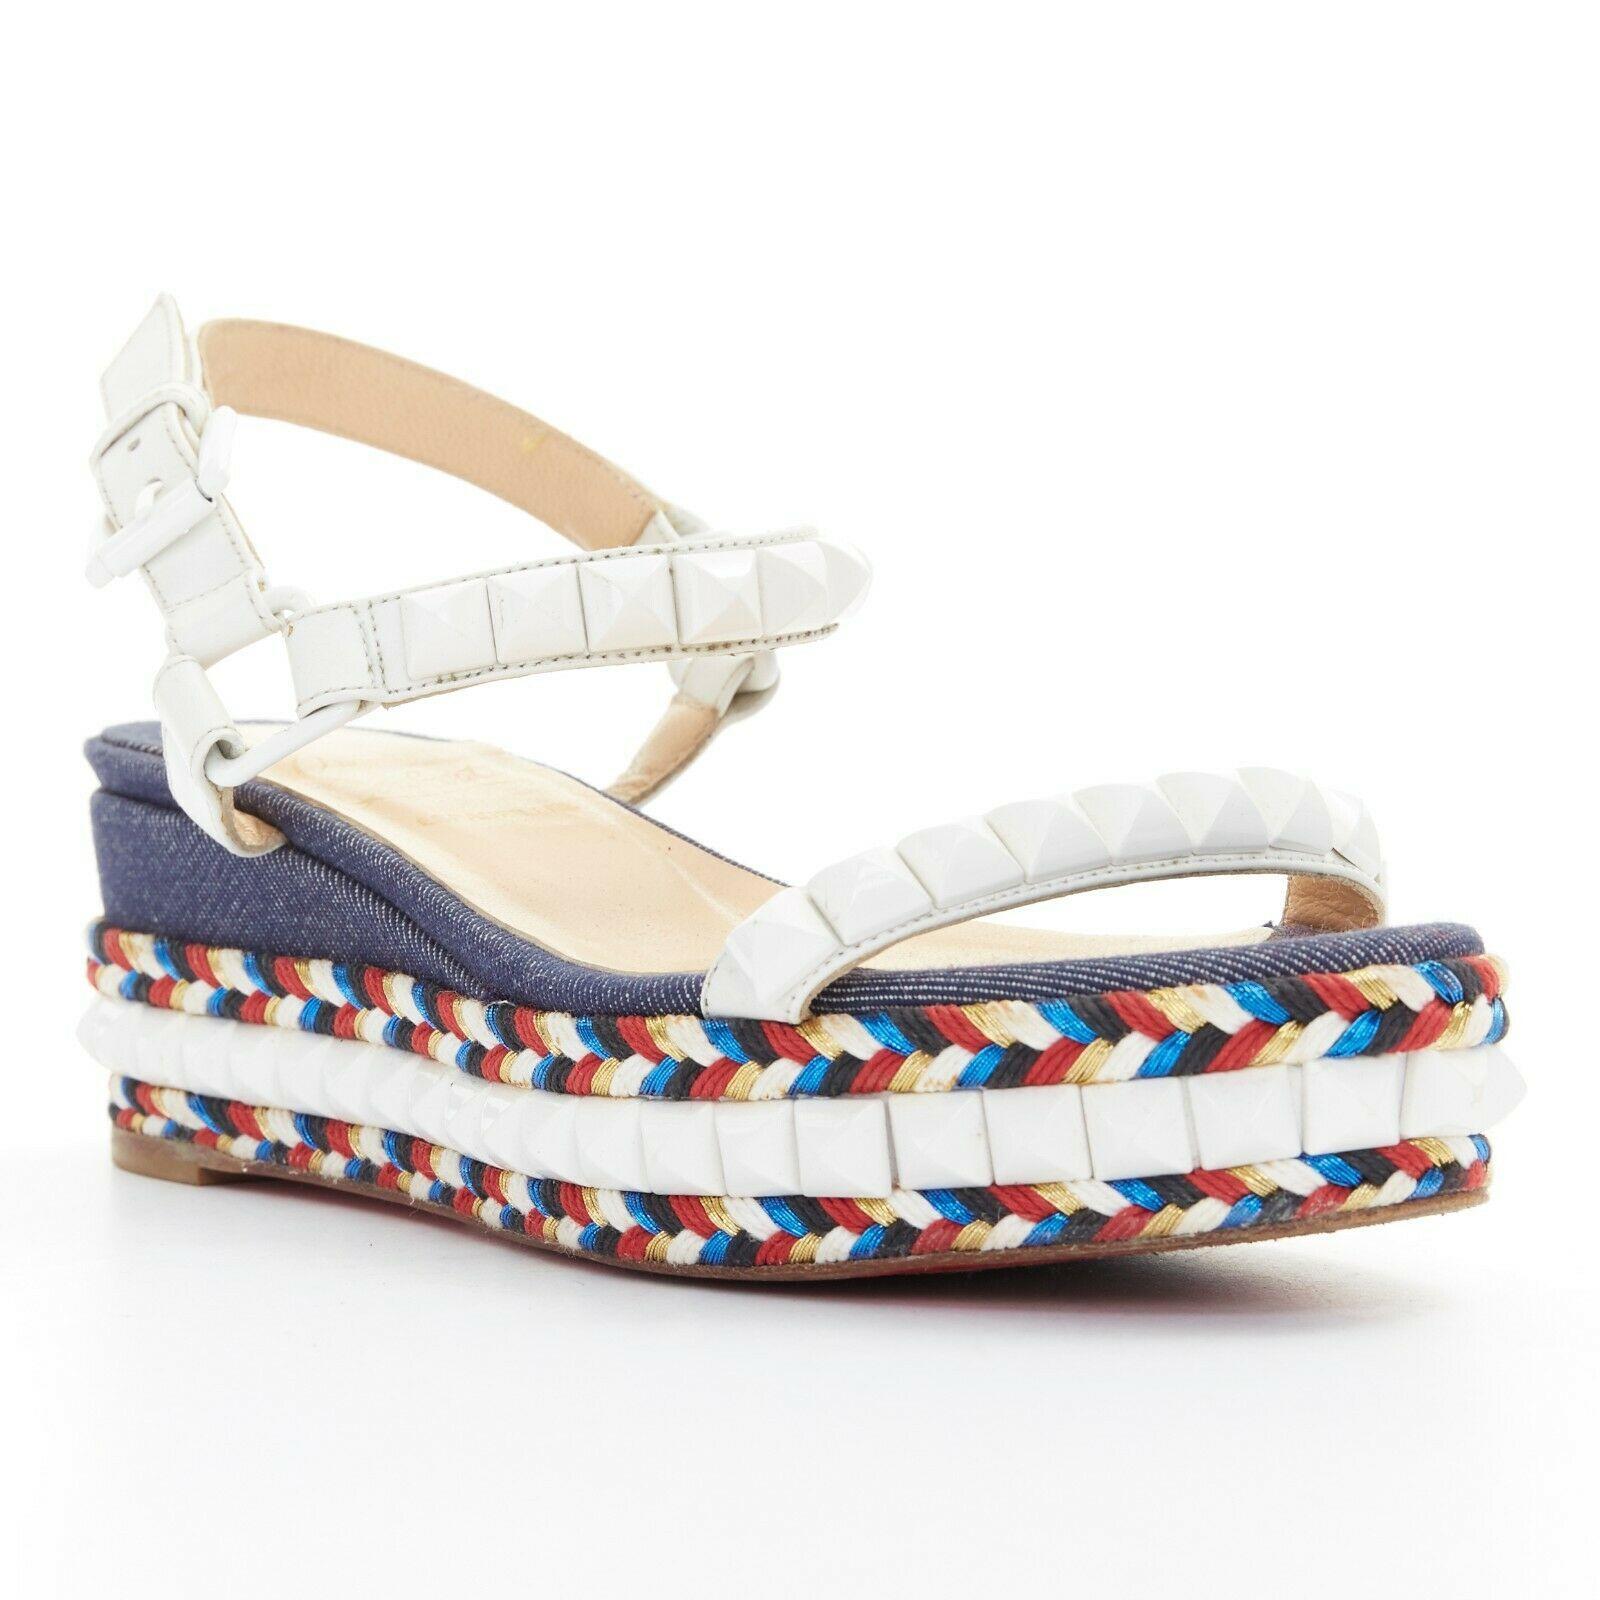 CHRISTIAN LOUBOUTIN Cataclou embroidery white spike stud platform sandal EU35
CHRISTIAN LOUBOUTIN
Cataclou sandals. Blue denim covered sole. Multicolor tribal embroidery trimming. 
White pyramid spike stud trimming along outsole. White leather stud